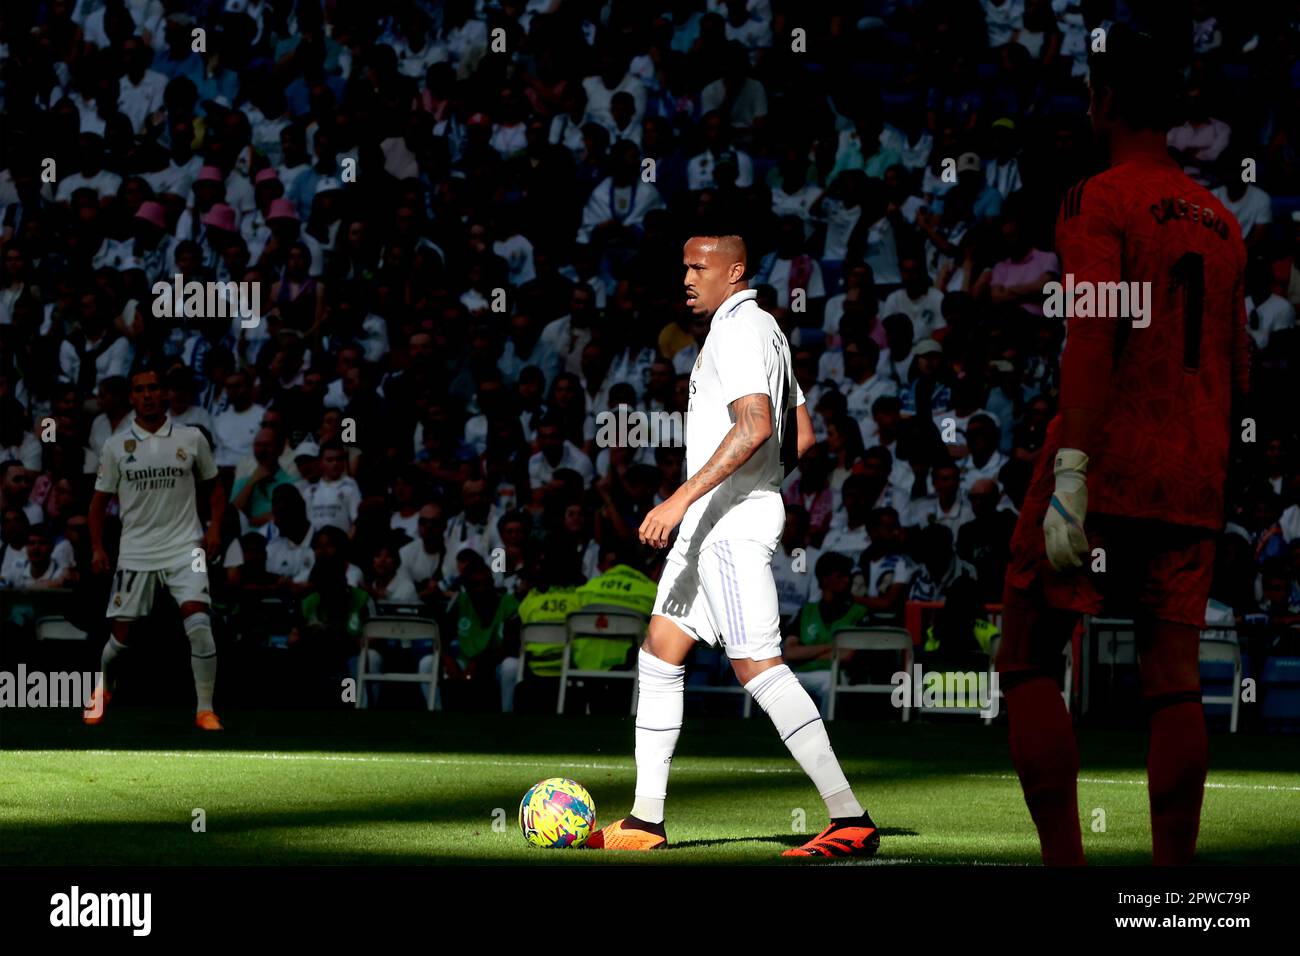 Madrid, Spain. 29th Apr, 2023. Madrid, Spain, 29.04.2023.- Real Madrid player Militao Real Madrid vs Almeria match of the Spanish Soccer League on matchday 32 held at the Santiago Bernabeu Stadium in the capital of the Kingdom of Spain. Final result 4-2. Real Madrid goals from Benzema 2 ,17 , 42 (P), Rodrygo 47 . Goals from Almeria Lazaro Vinicius 40' 5, and Lucas Robertone 61' Credit: Juan Carlos Rojas/dpa/Alamy Live News Stock Photo